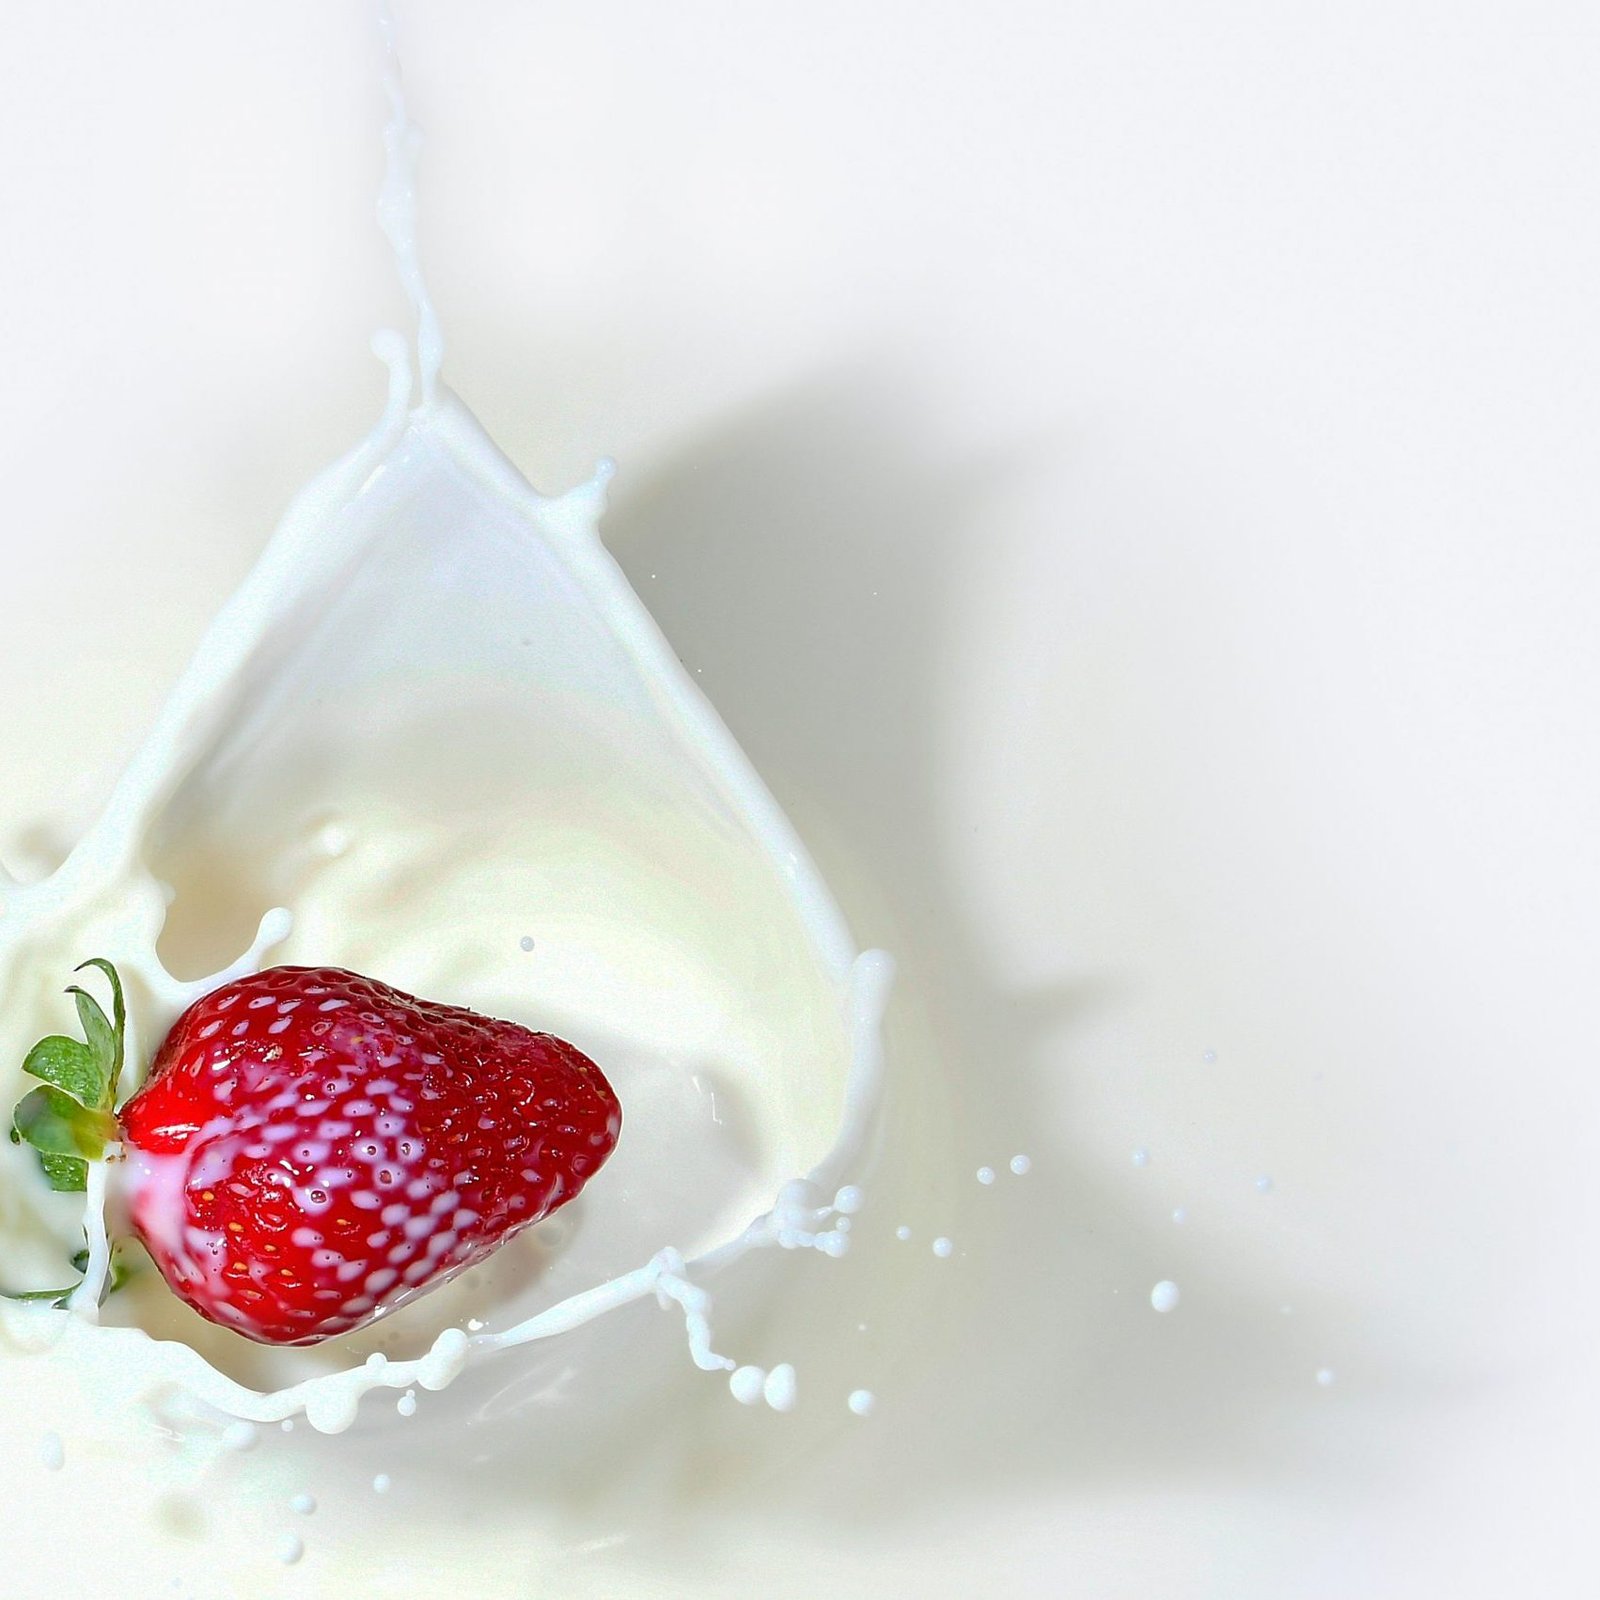 strawberry-fruit-dropped-in-milk-2064357